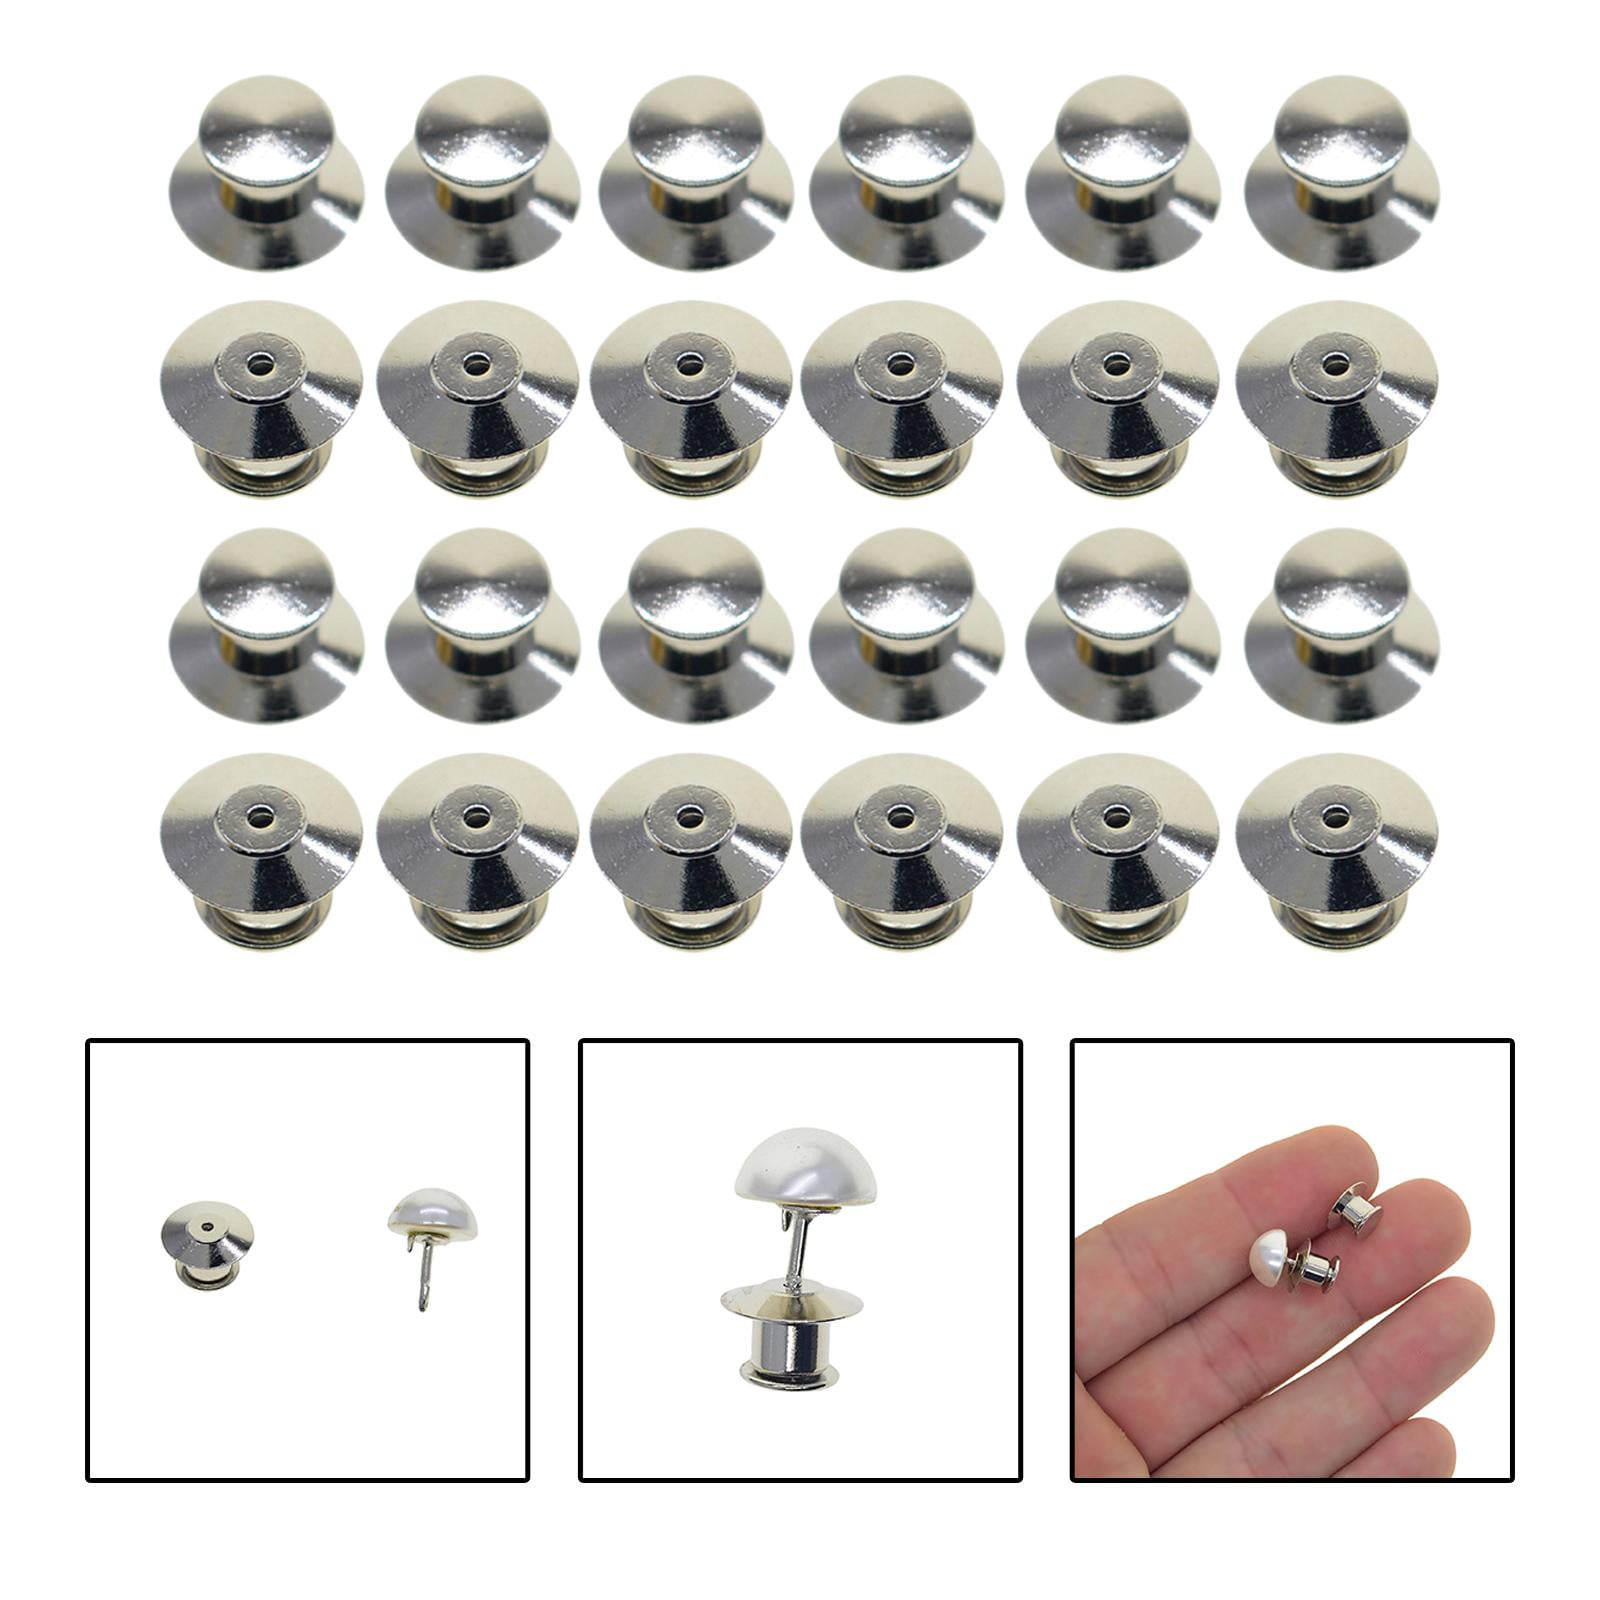  20PCSLocking Pin, Backs LockingPin,Keepers Clasp,Flat Head  clamp,Needle Back Lock,Suitable for brooches, Lapels, Badges, Enamel  Needles and DIY Crafts,Without Needle